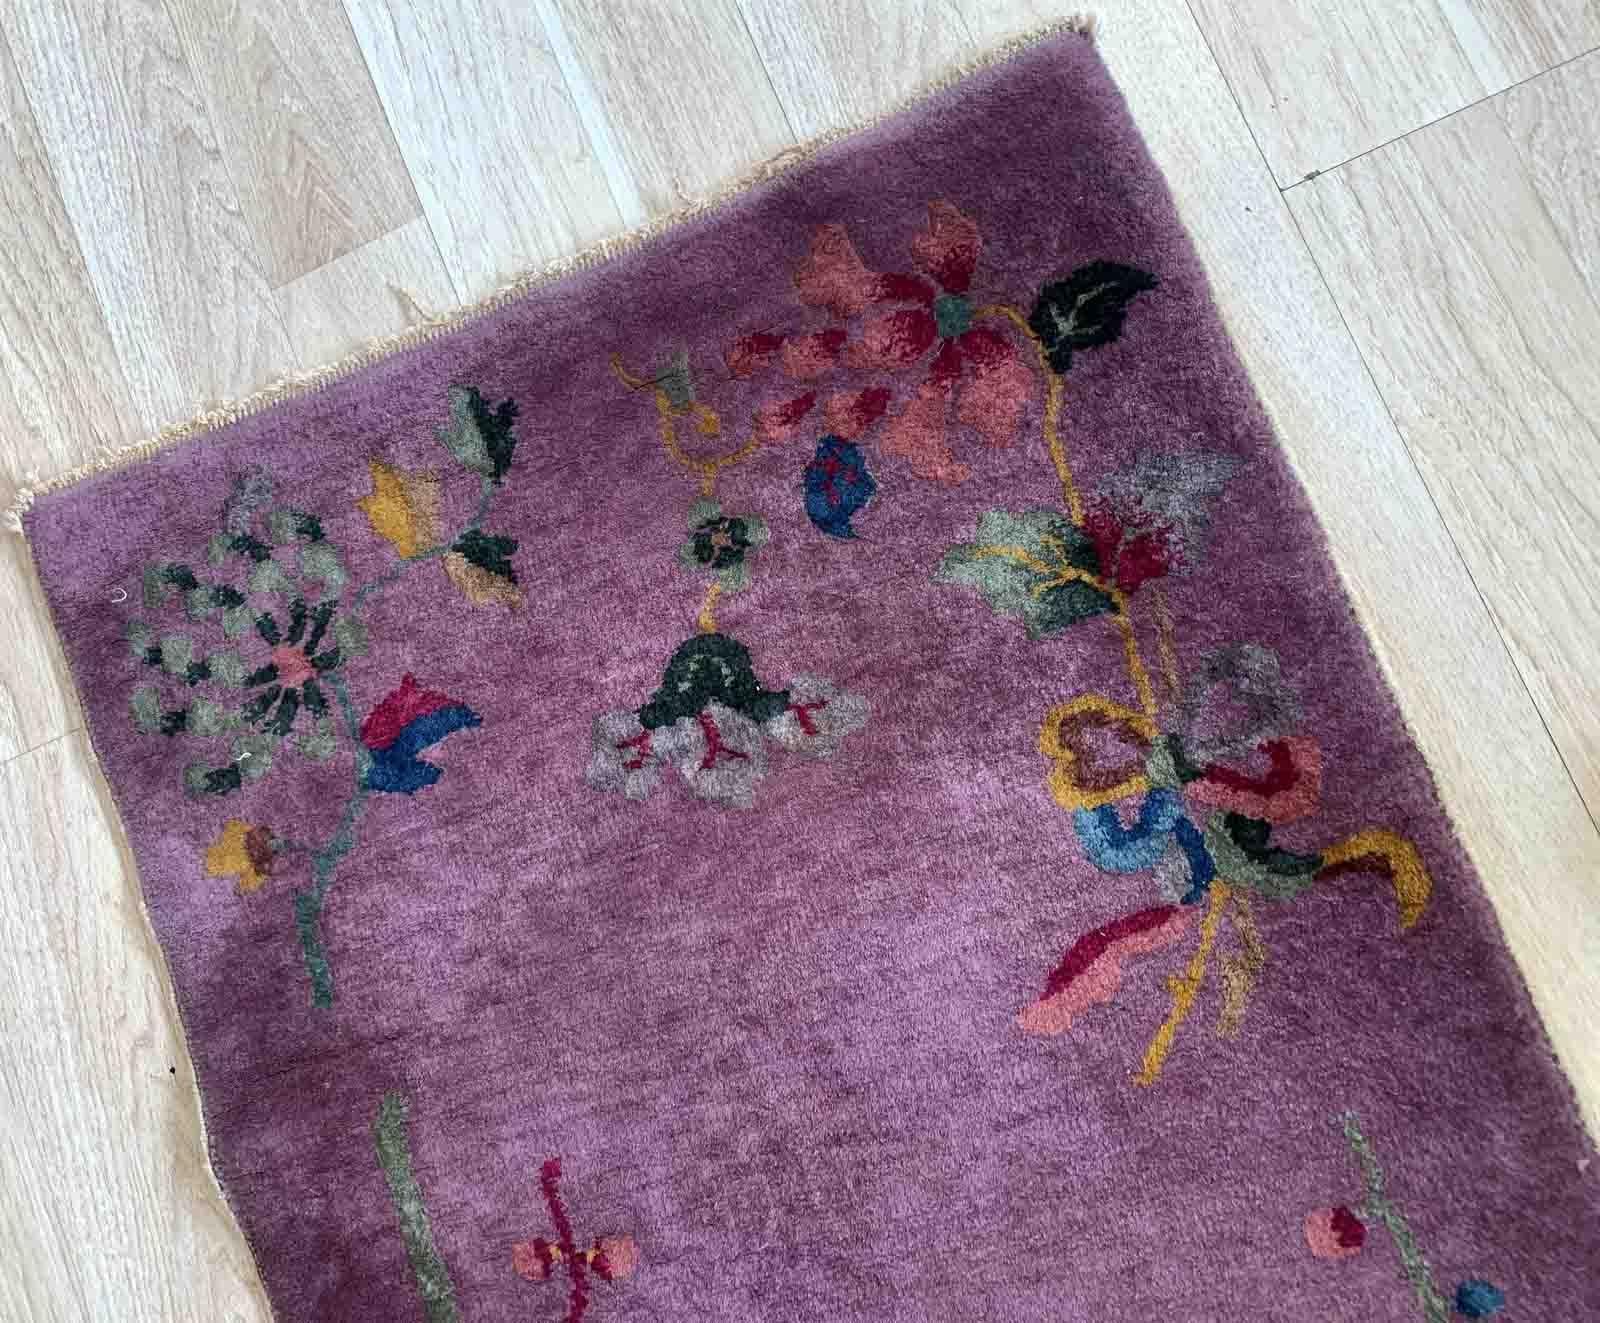 This handmade antique Chinese rug from the 1920s is a stunning example of Art Deco design. With its compact size of 2.2' x 4.1' (67cm x 124cm), it is perfect for adding a touch of vintage elegance to any space. The rug is crafted from high-quality